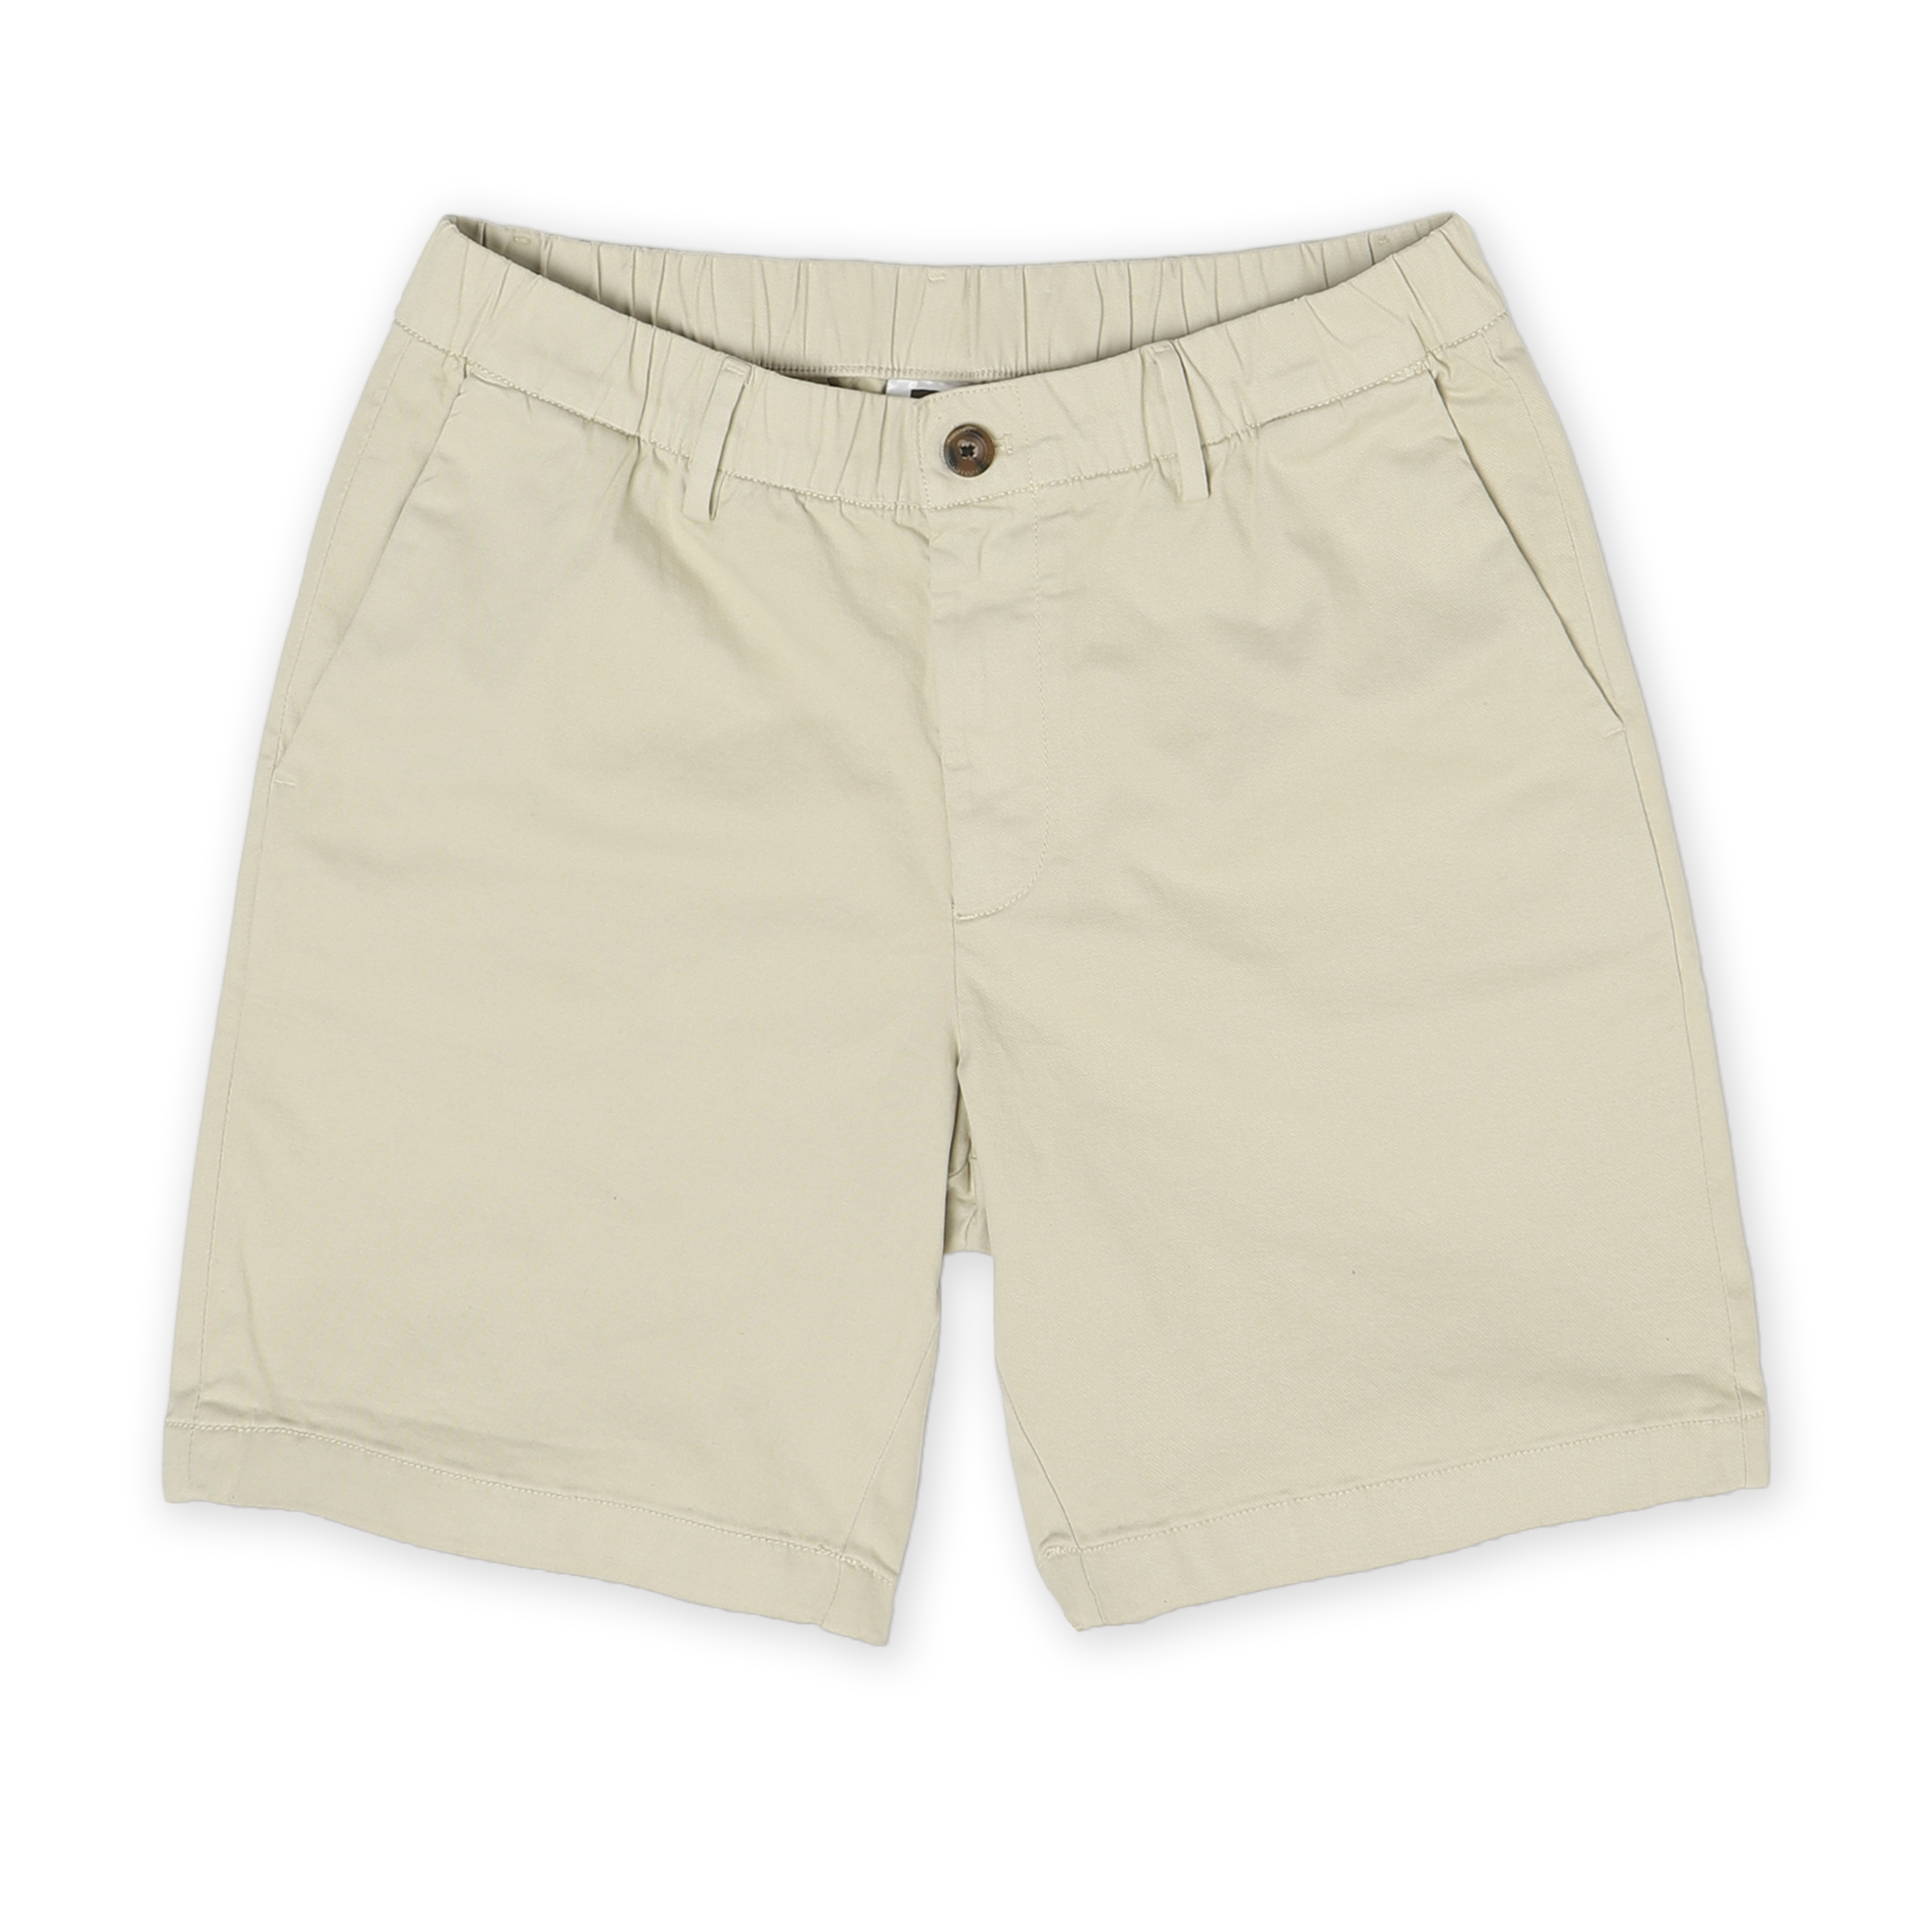 Stretch Chino Short 5.5" in Stone front with elastic waistband, belt loops, buttoned fly, and two slant pockets